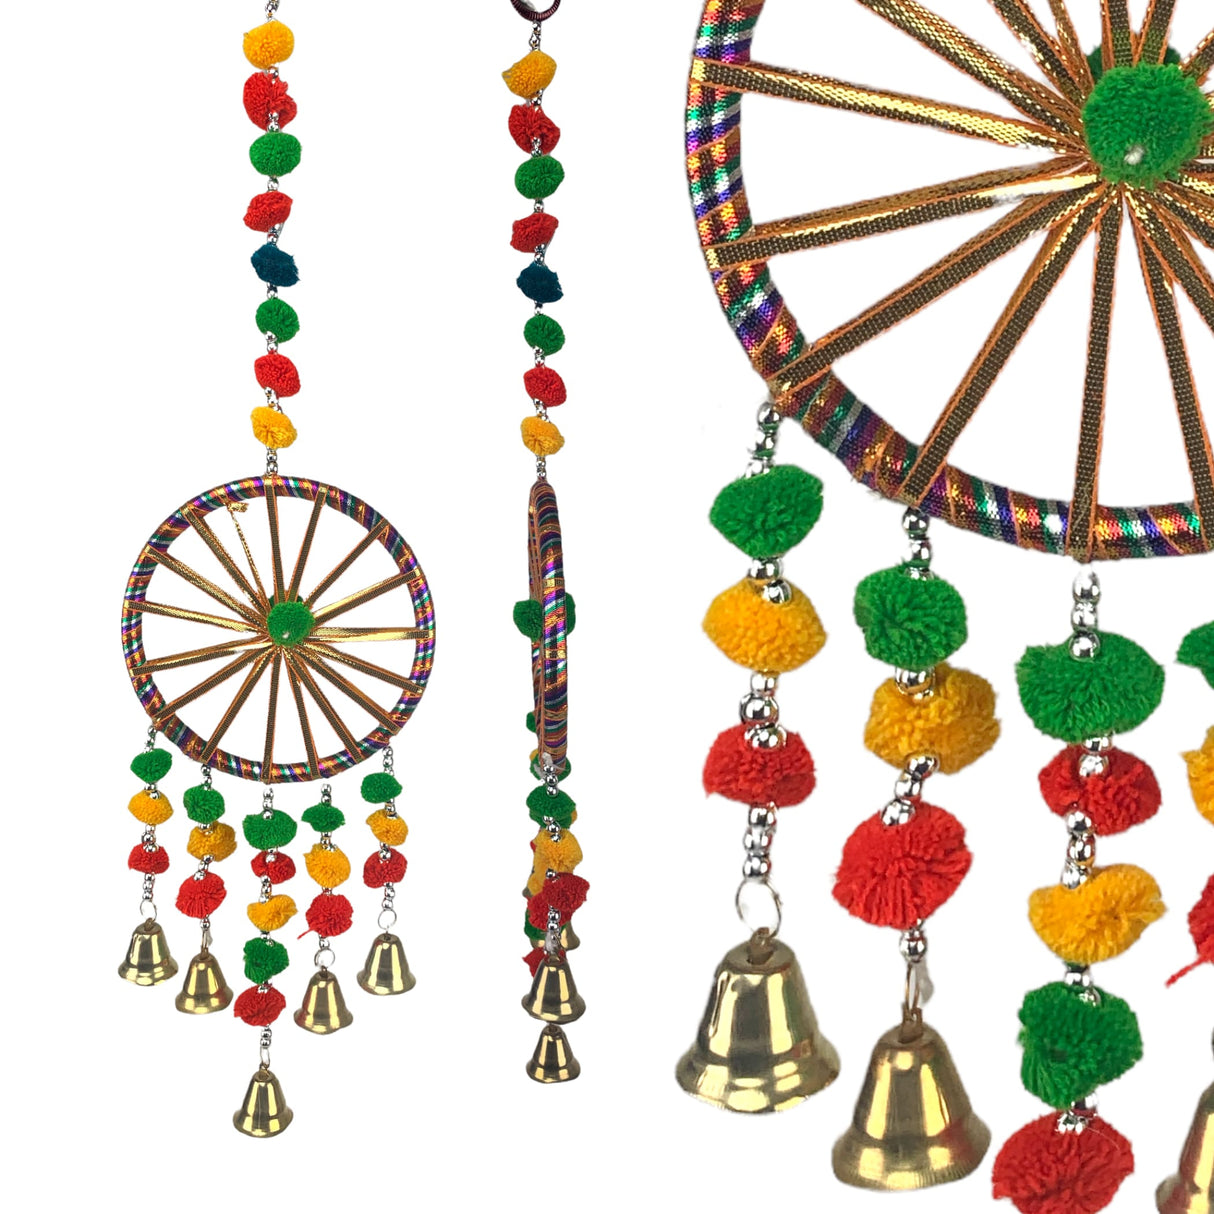 Ring wall hanging with pompom rajasthani traditional